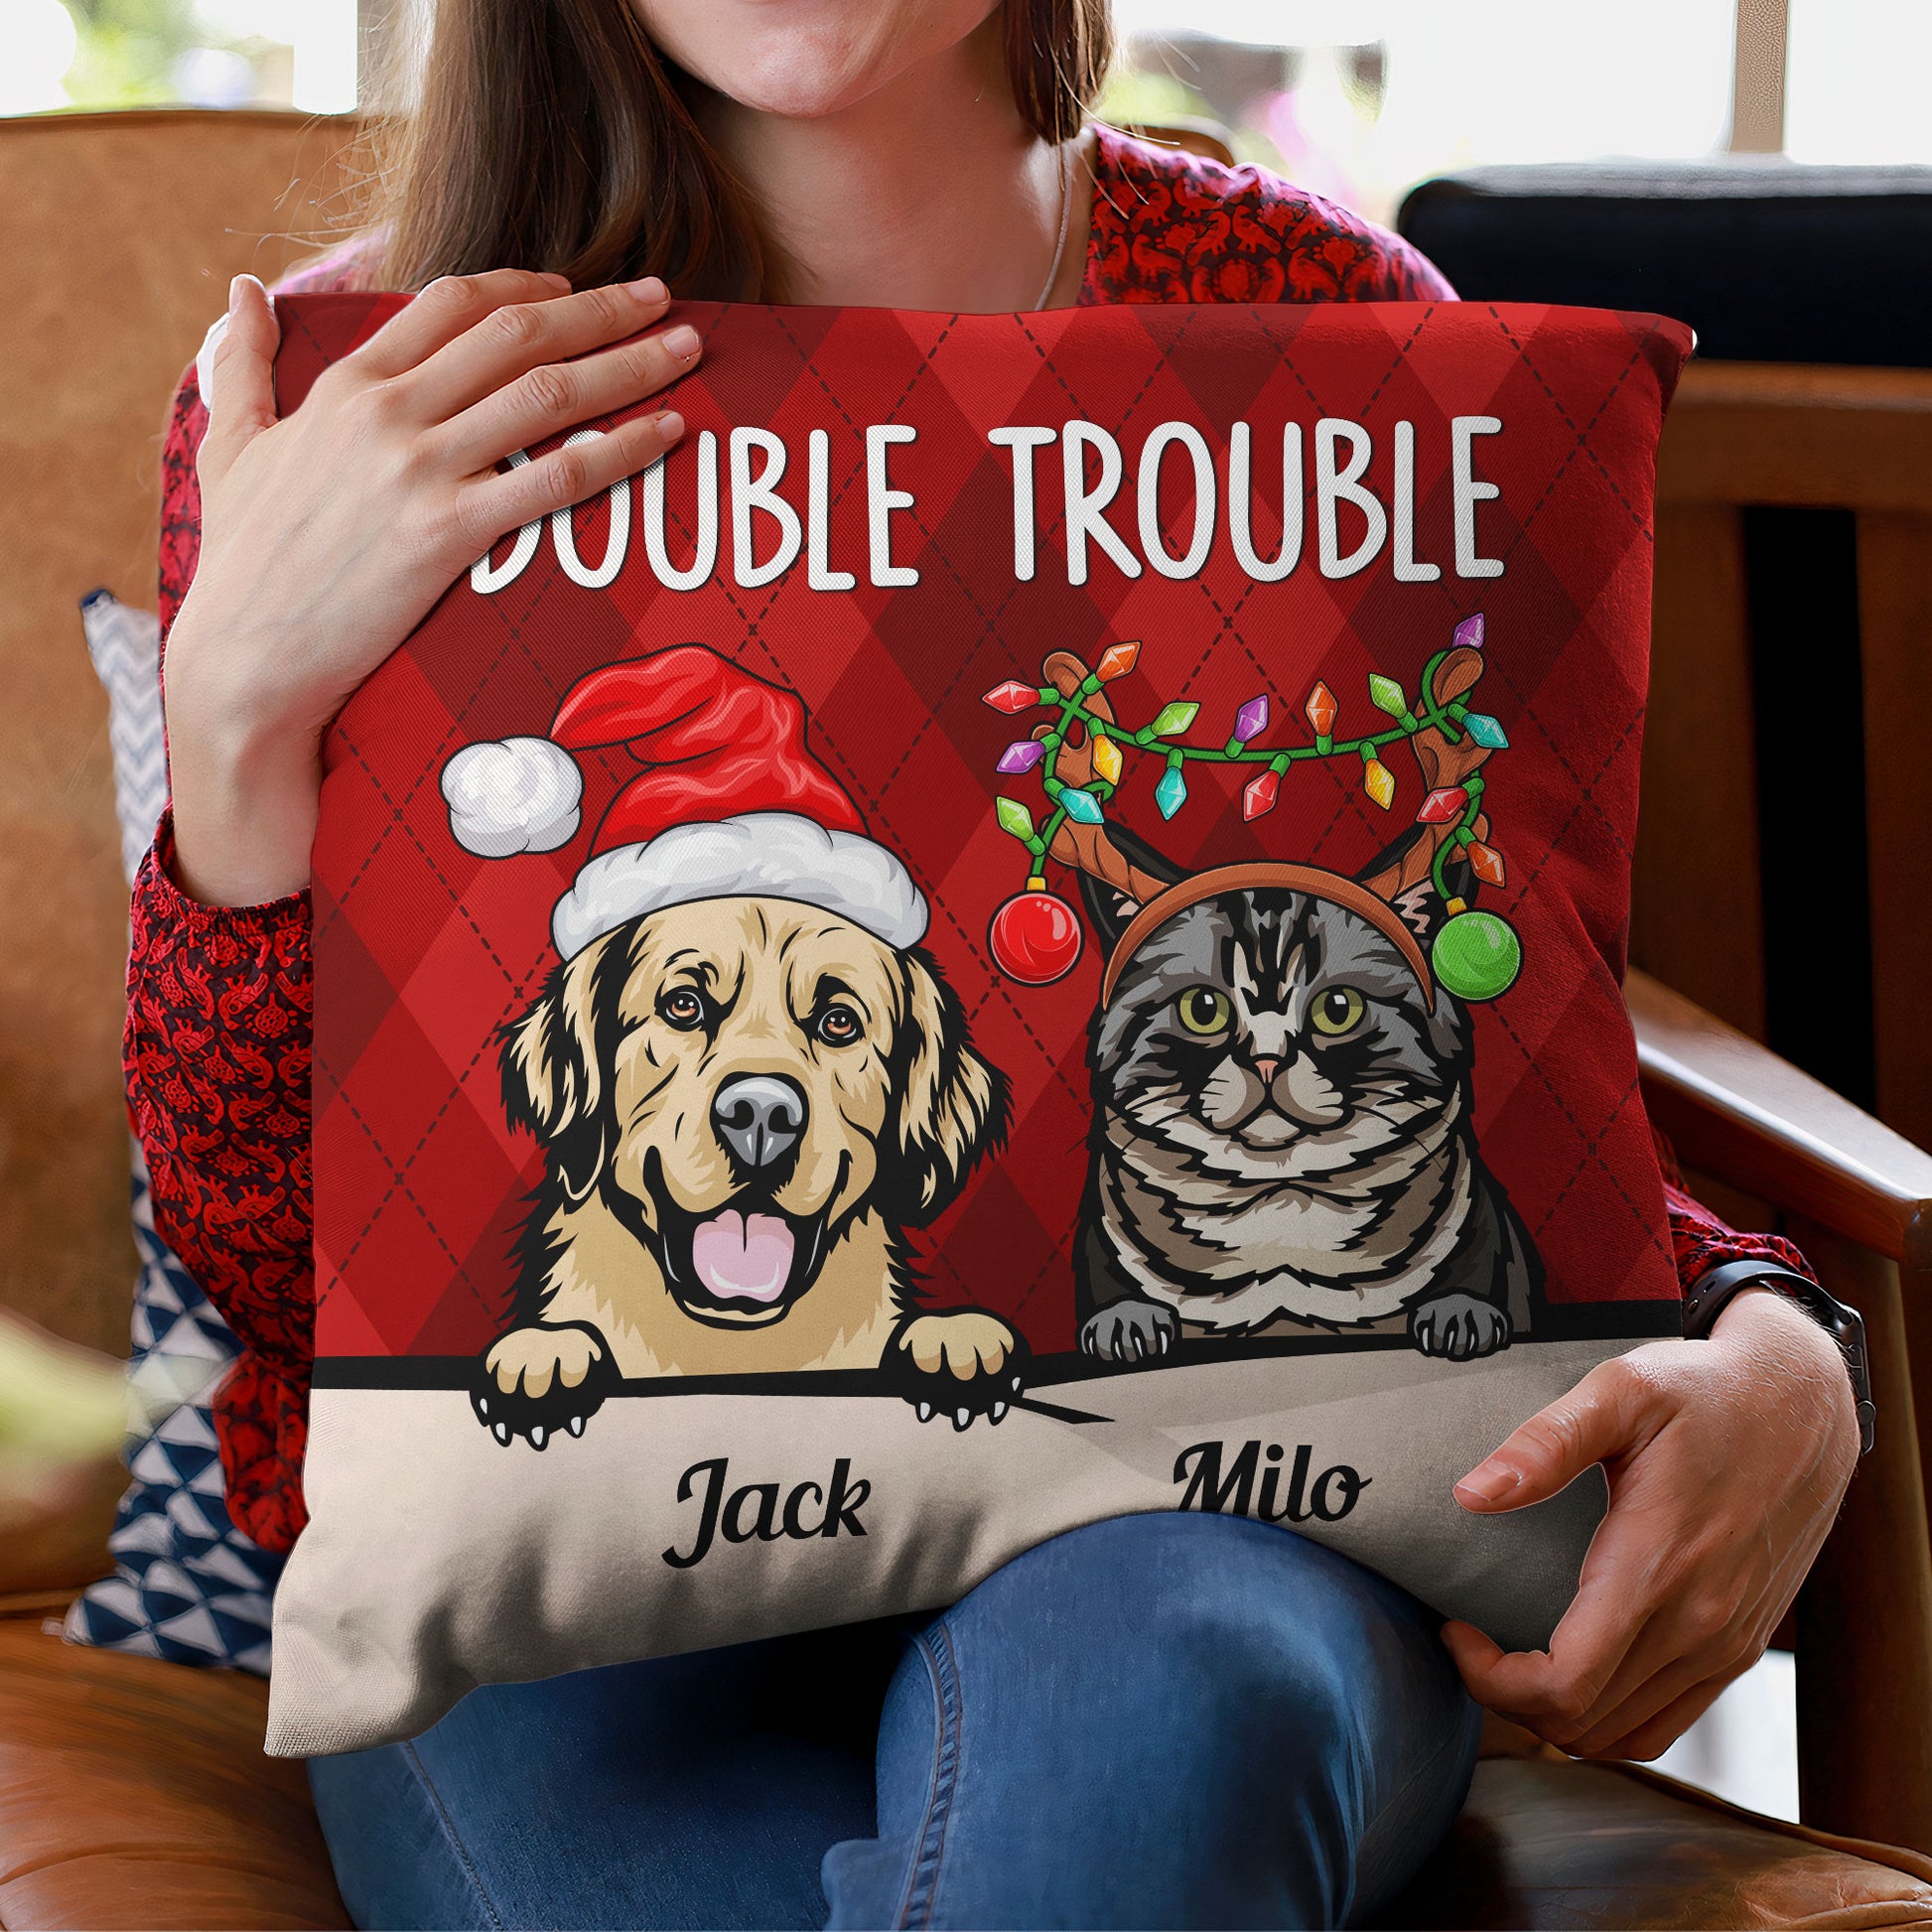 Double Trouble - Personalized Pillow - Christmas Gift For Cat & Dog Lover, Pet Owner, Pet Parents